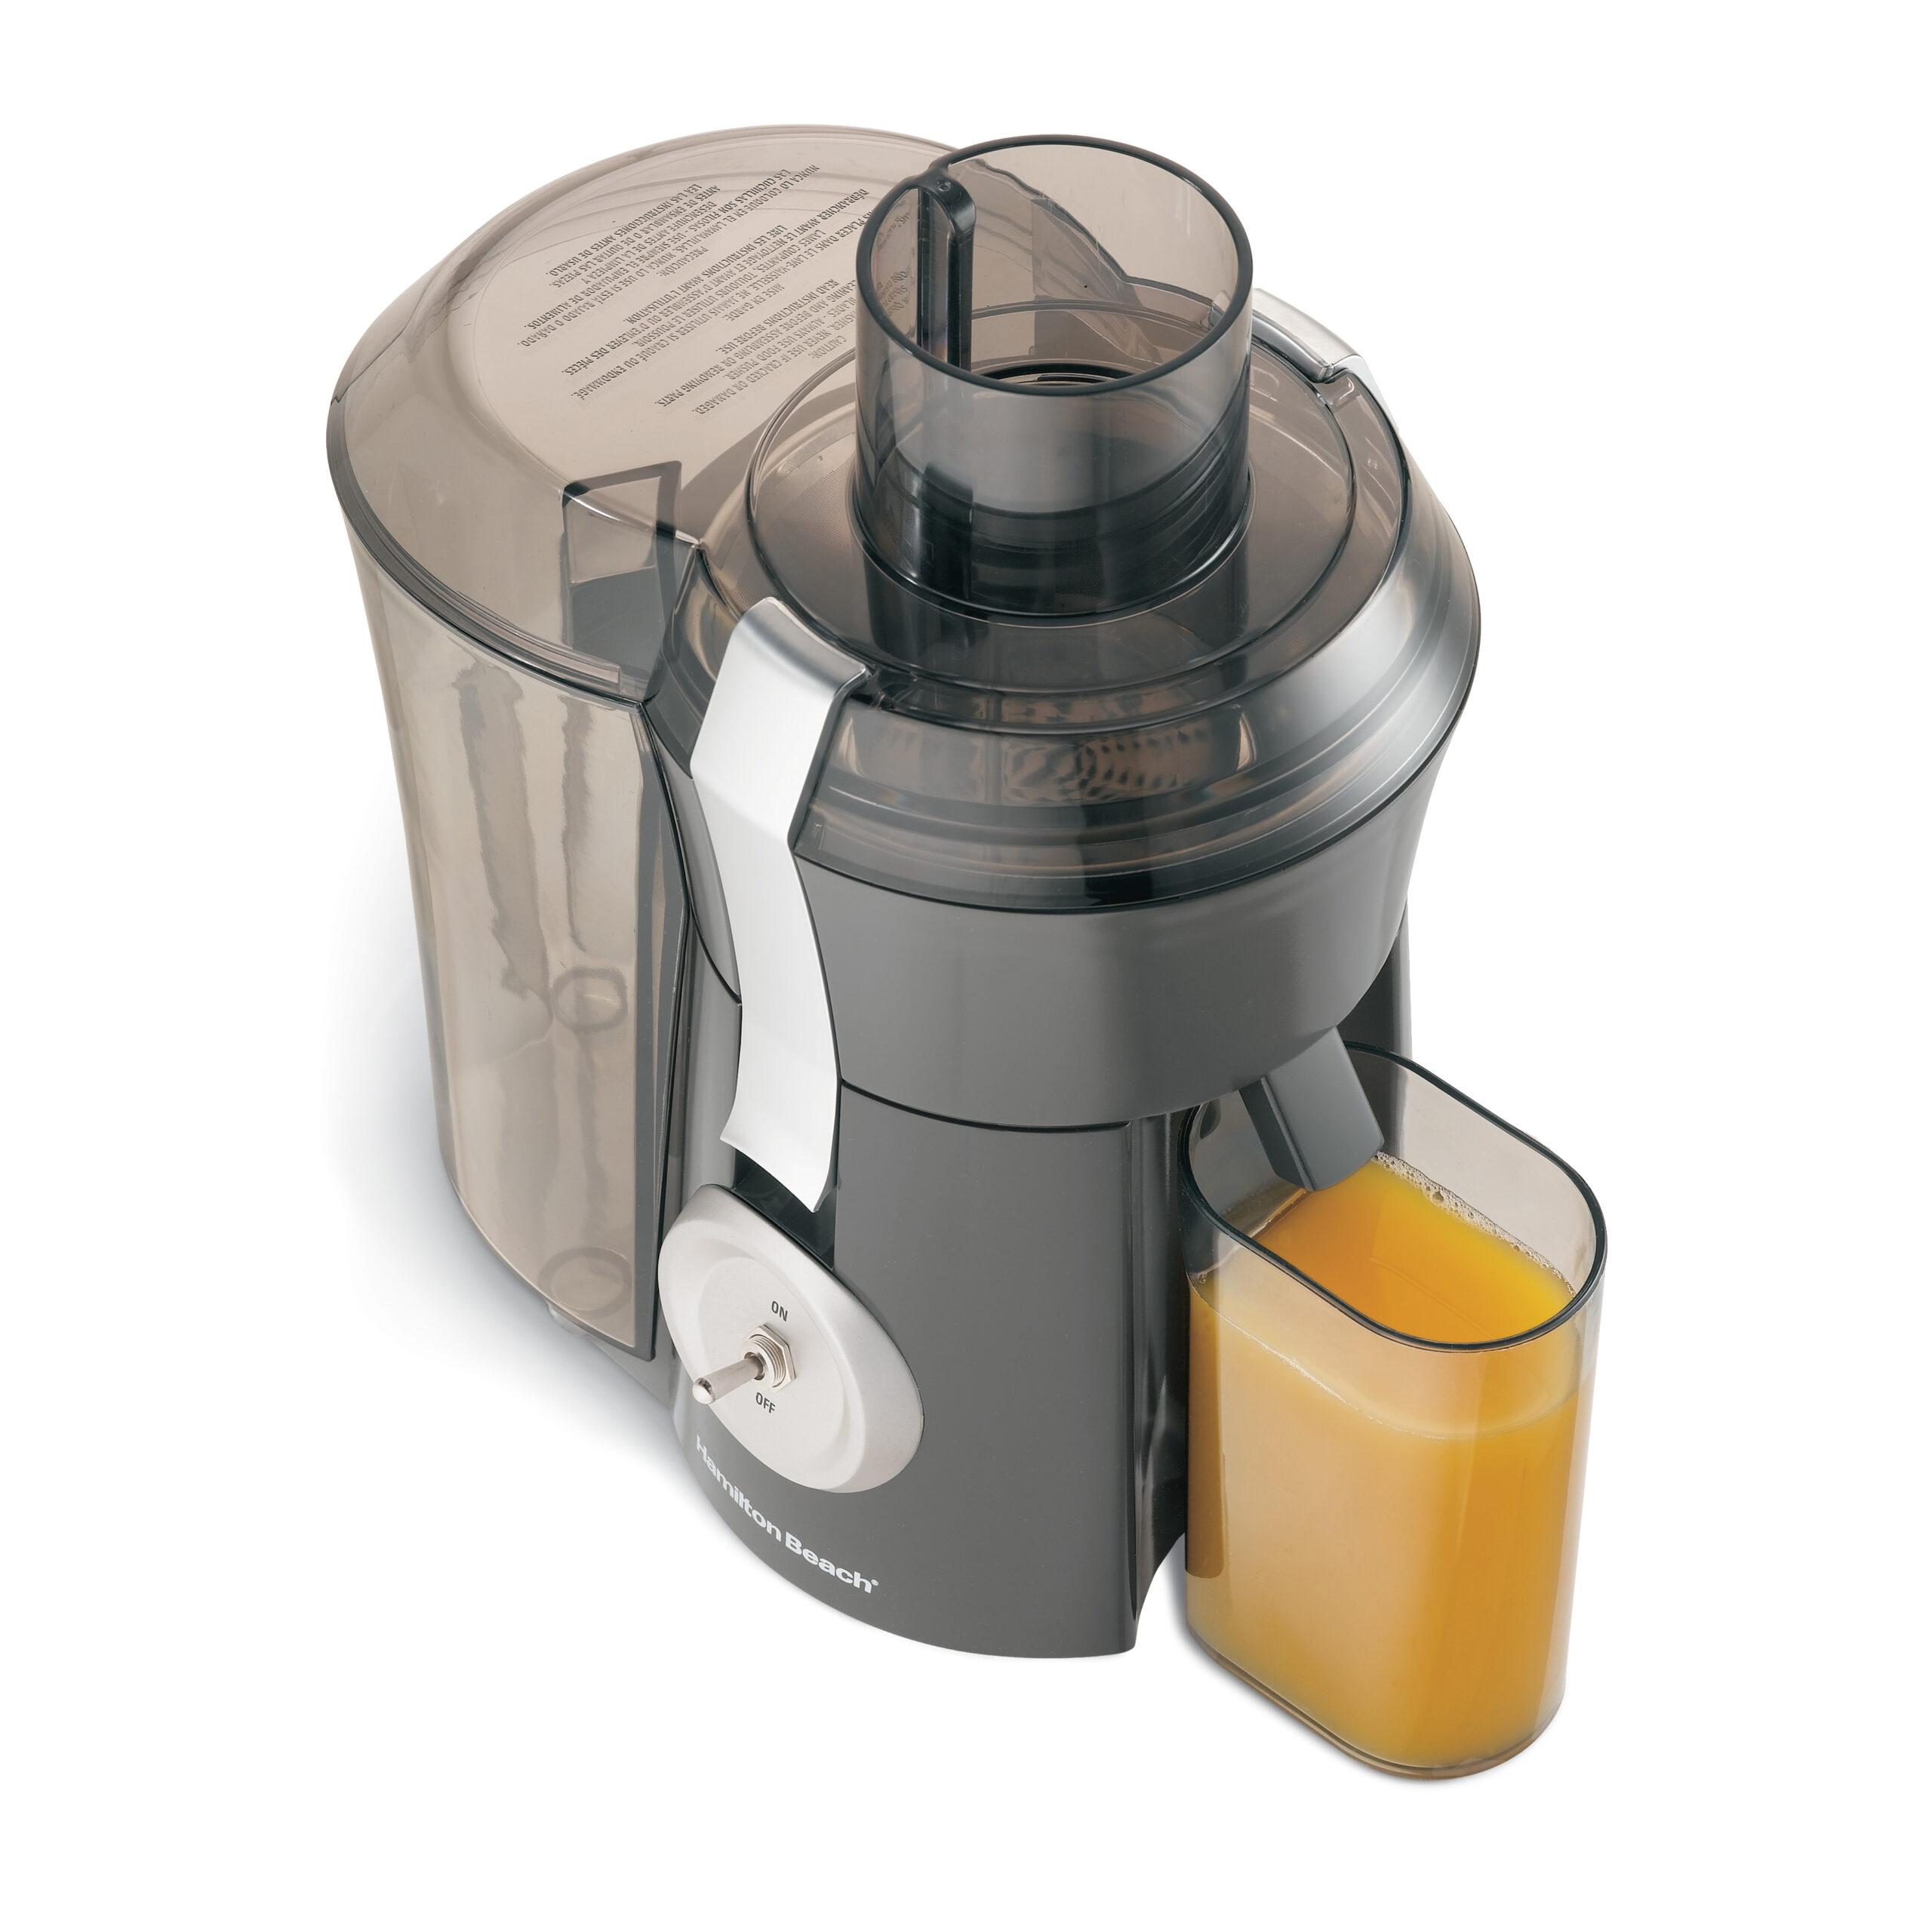 Top 15 Juice Extractors and their Prices in Nigeria